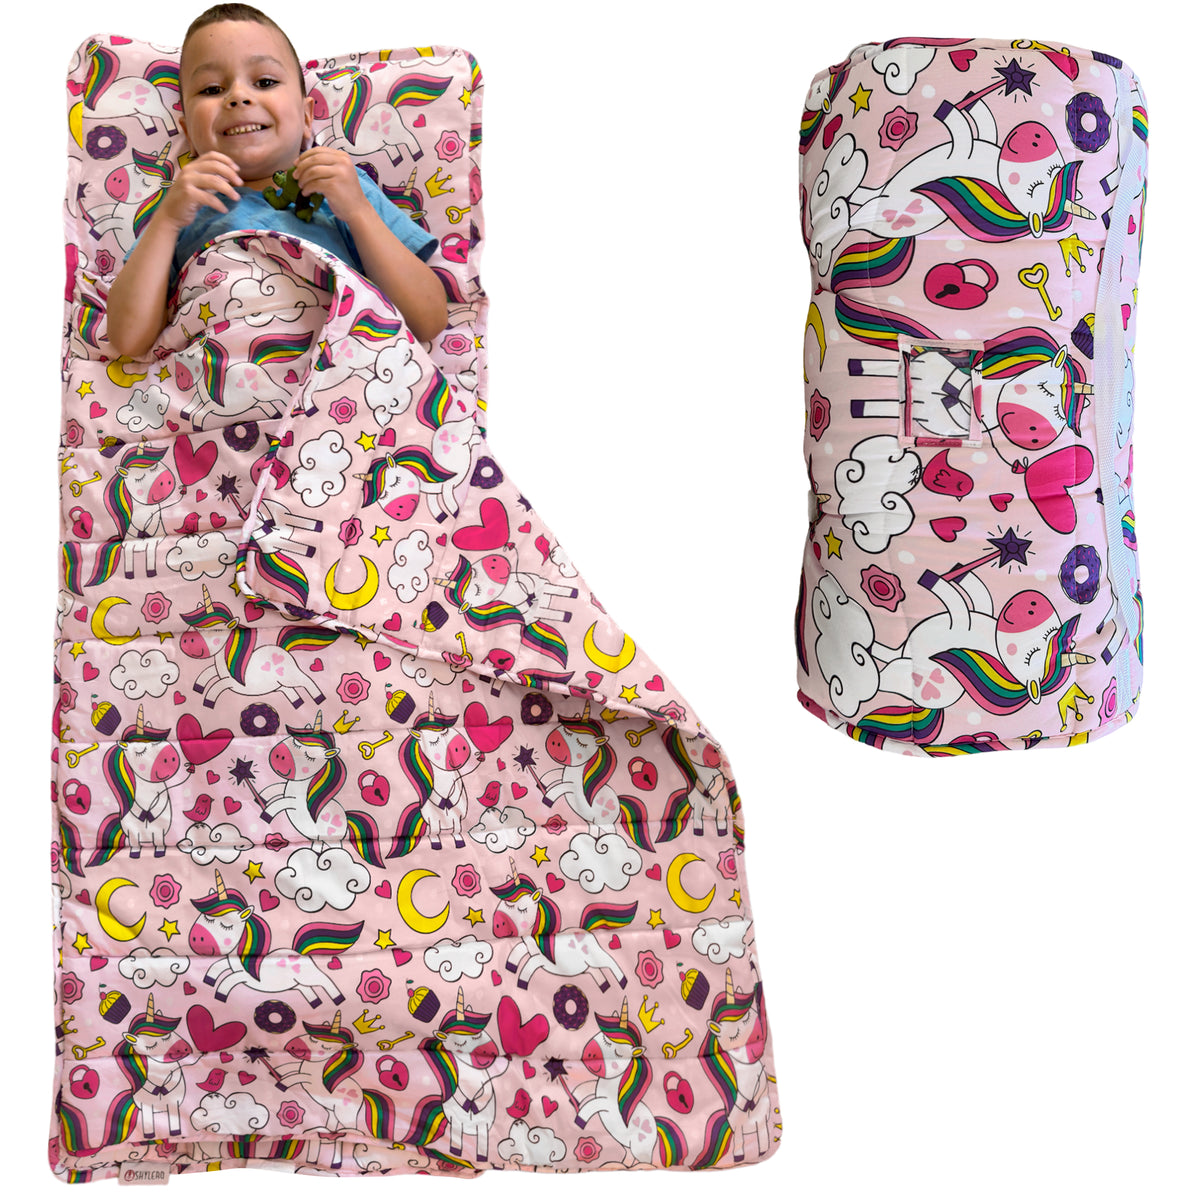 Toddler Nap Mat with Removable Pillow, Wide Blanket | 55" х 21" | Age 3-7 | Pink Unicorn